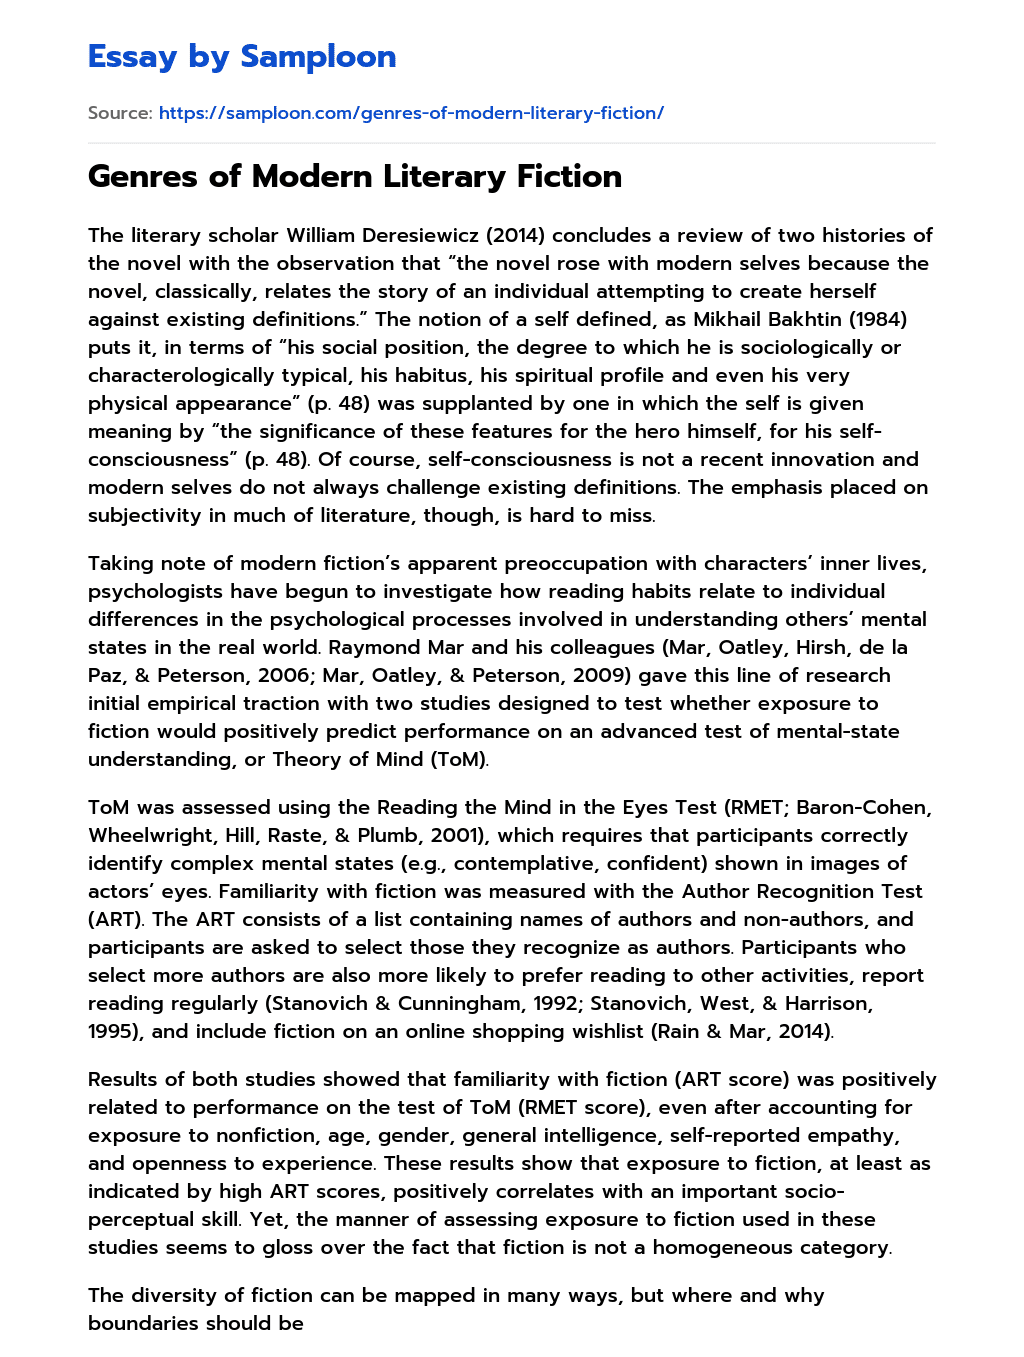 Genres of Modern Literary Fiction essay